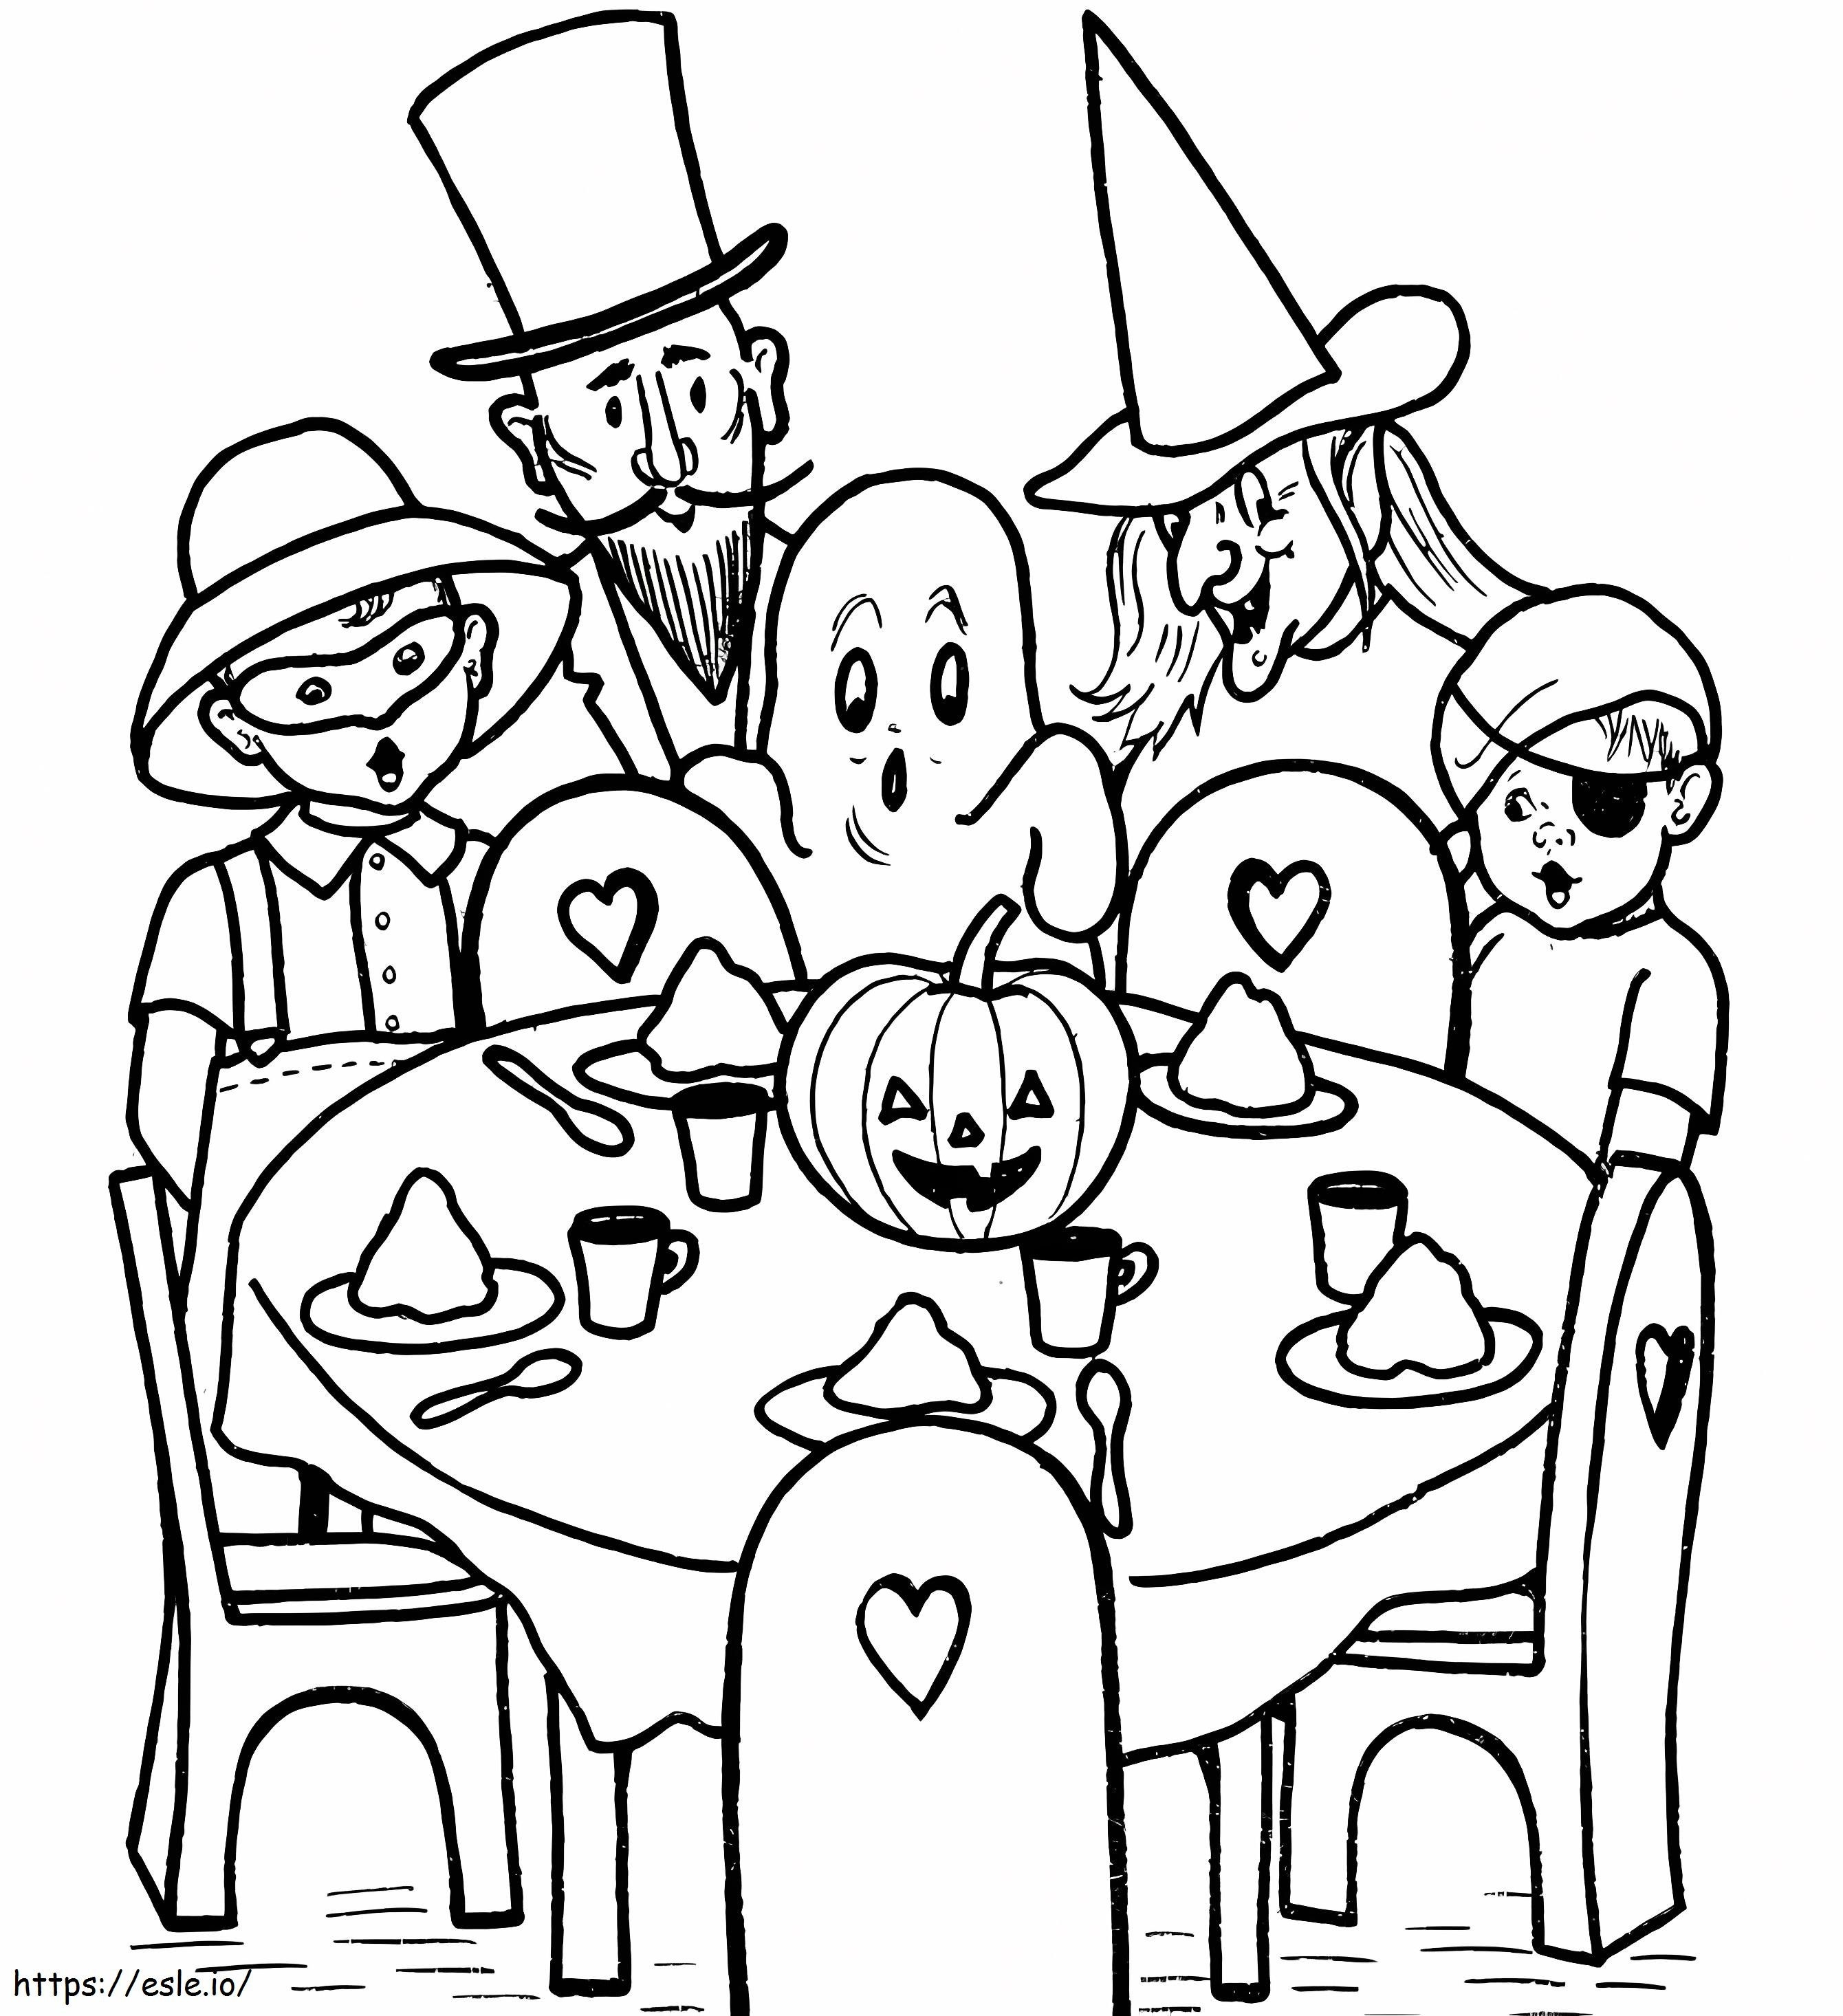 1540547700 Free Printable Halloween For Kids coloring page